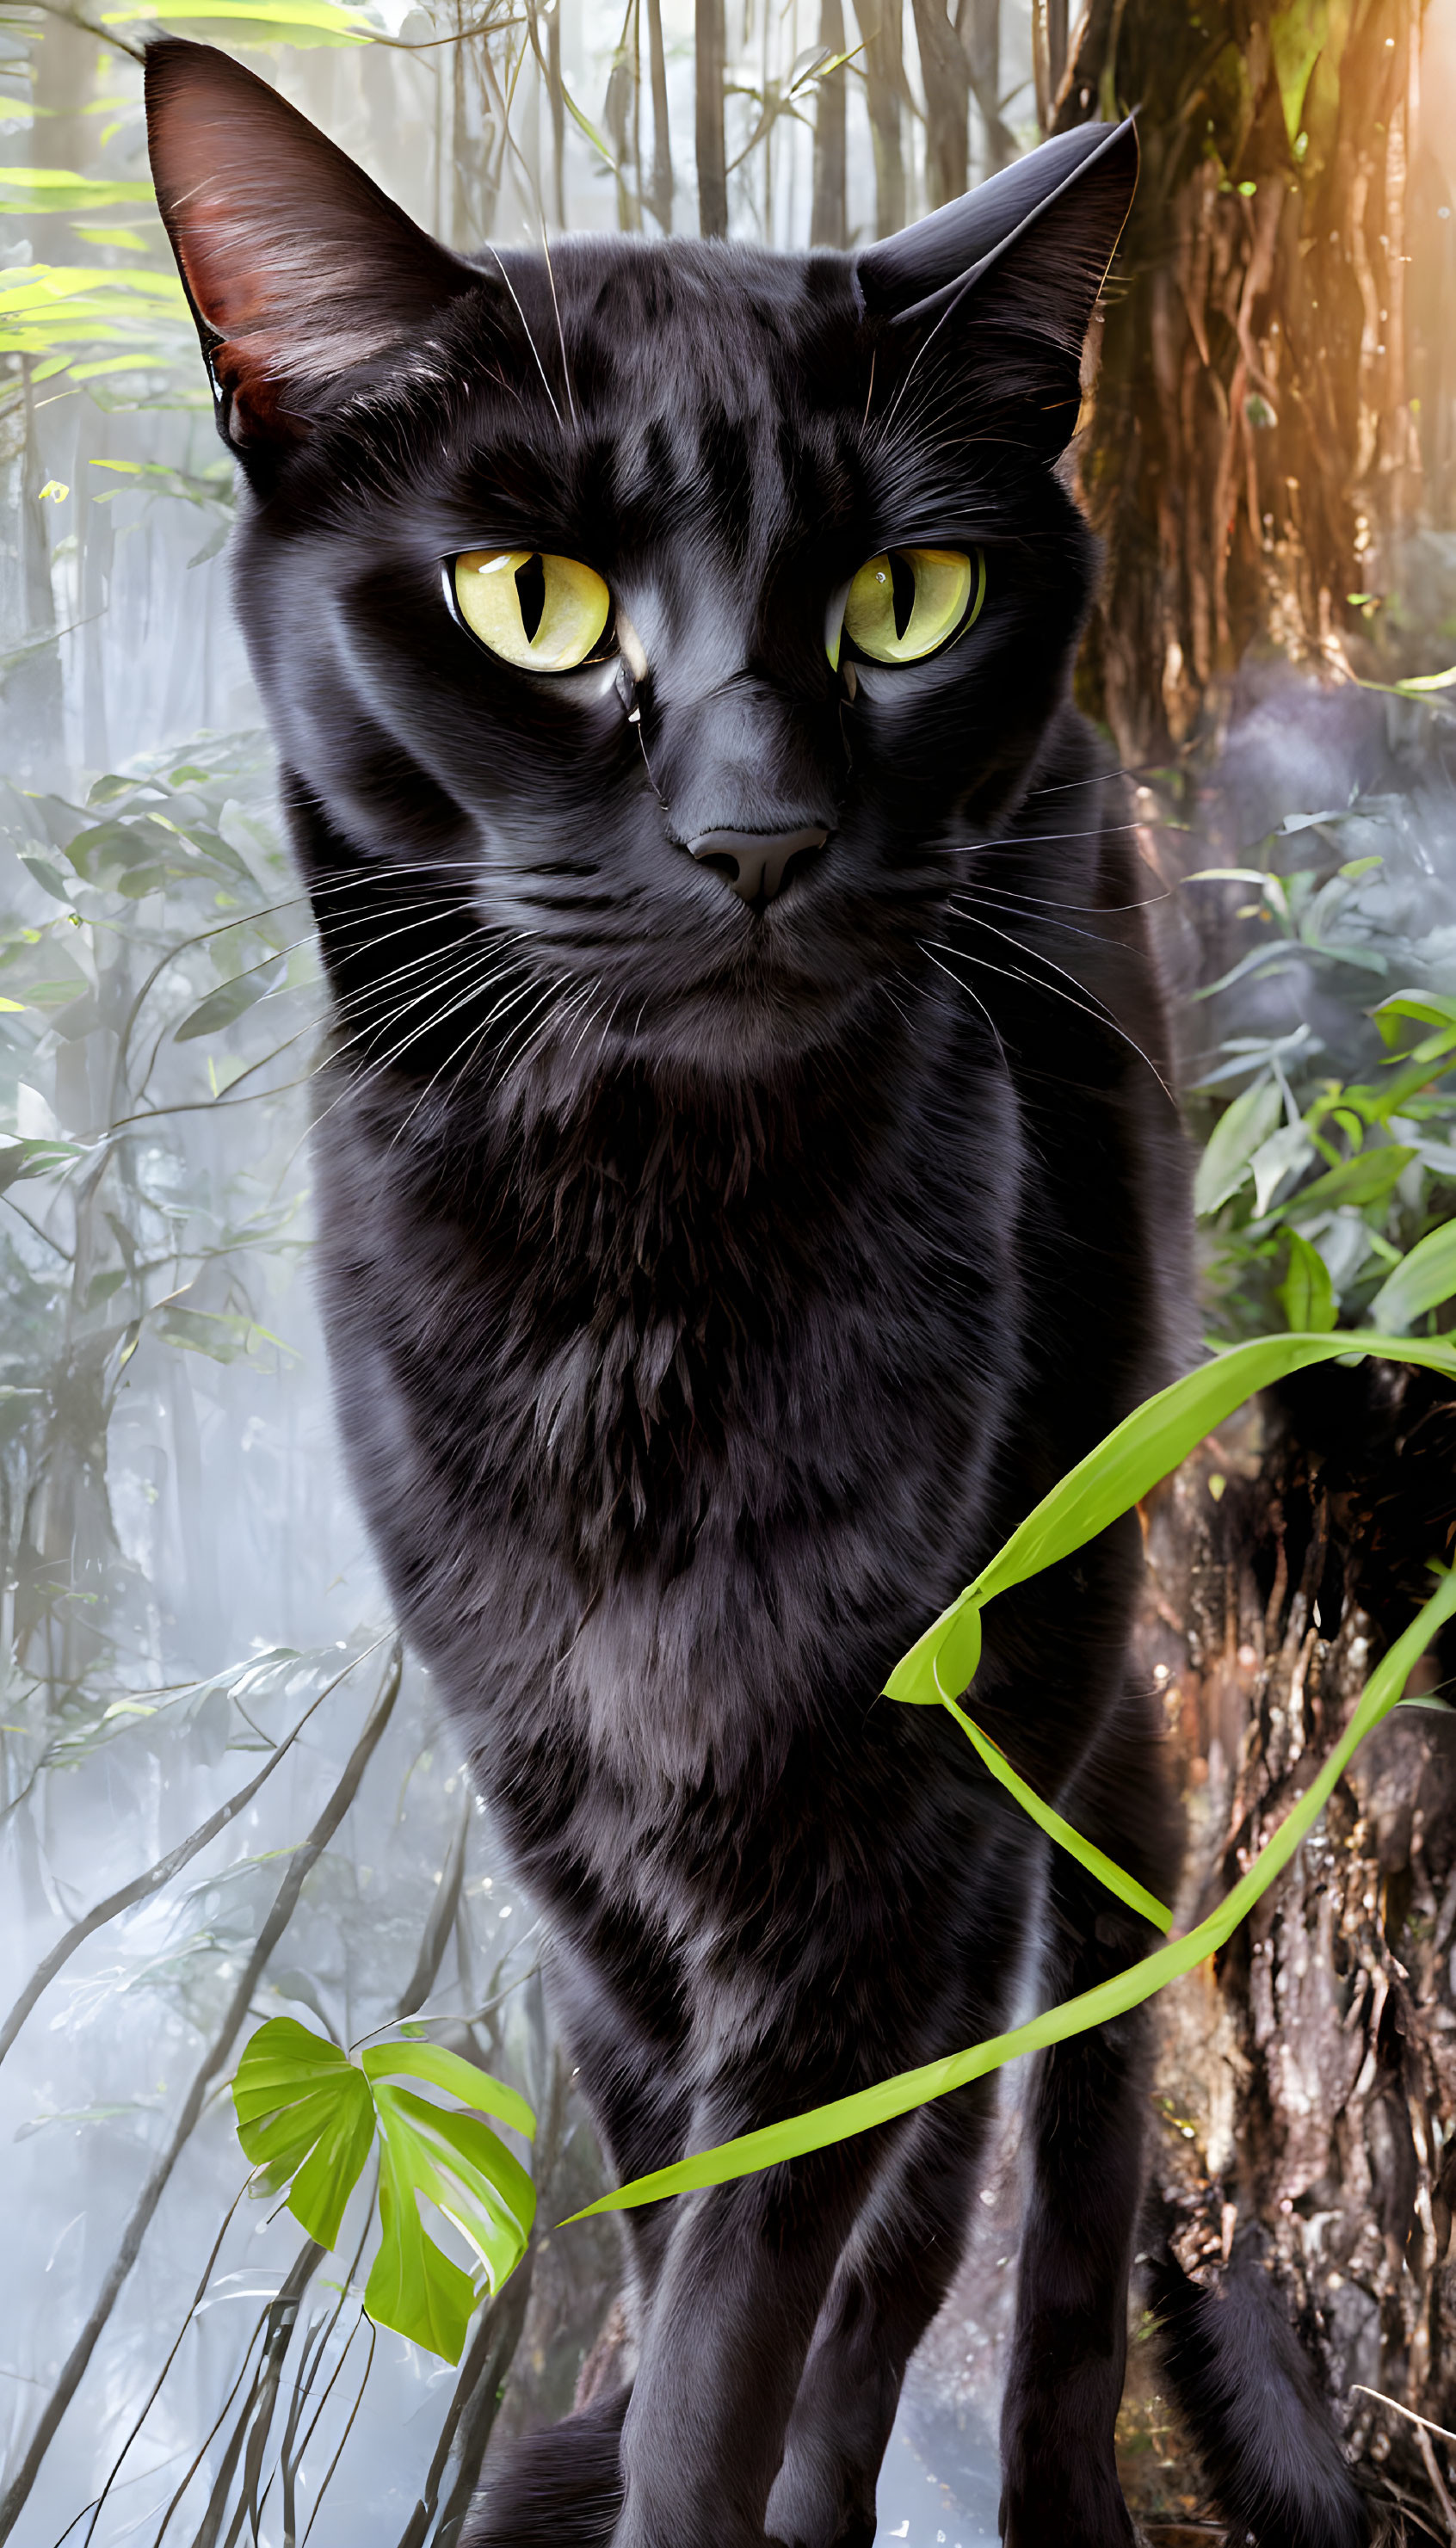 Digital artwork of black cat with yellow eyes in misty forest